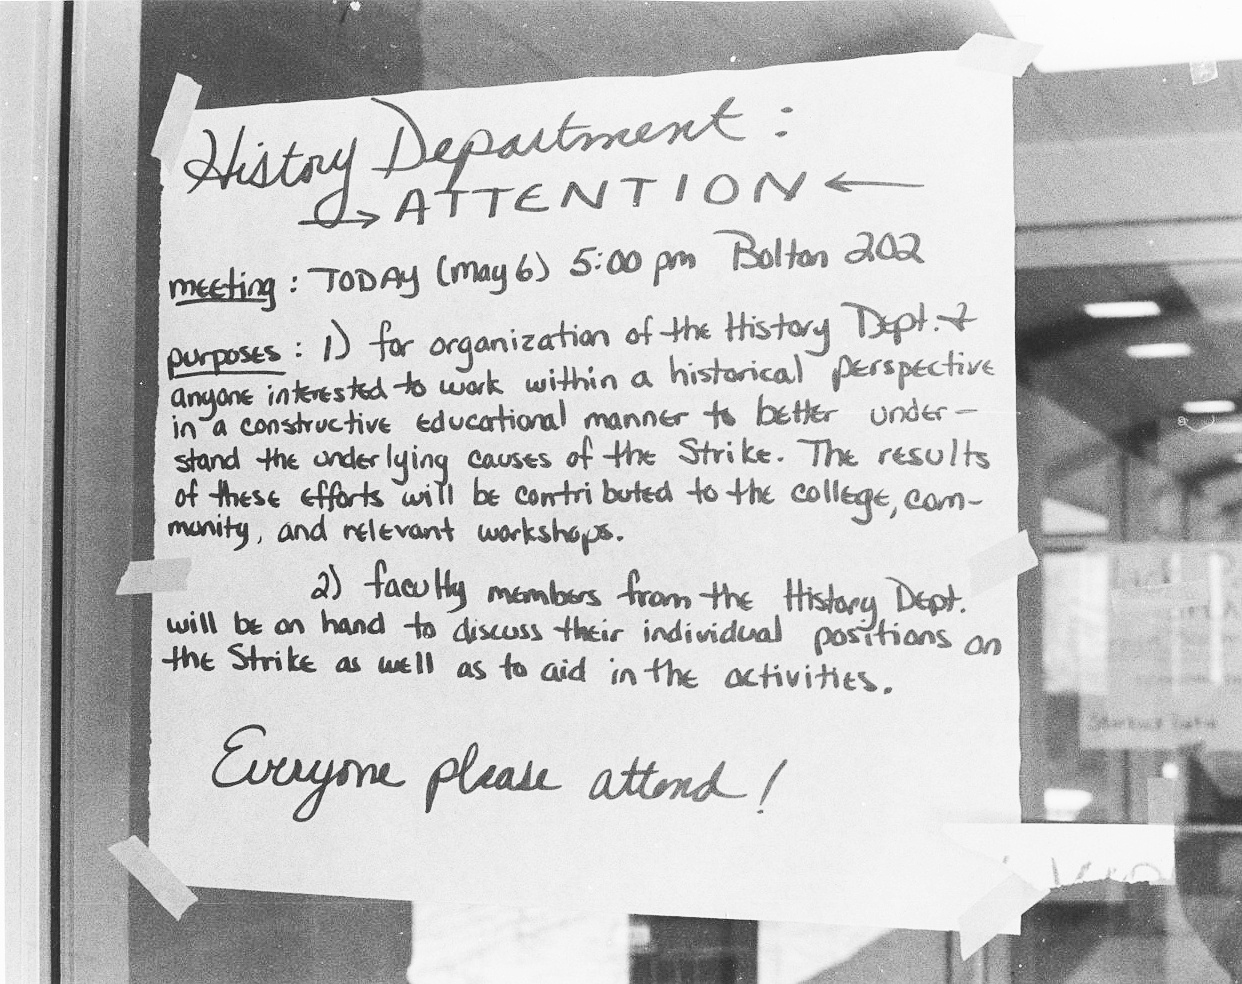 A black and white photograph shows a handwritten sign labelled “History Department: ATTENTION” with details about a meeting taped to a glass window or door.